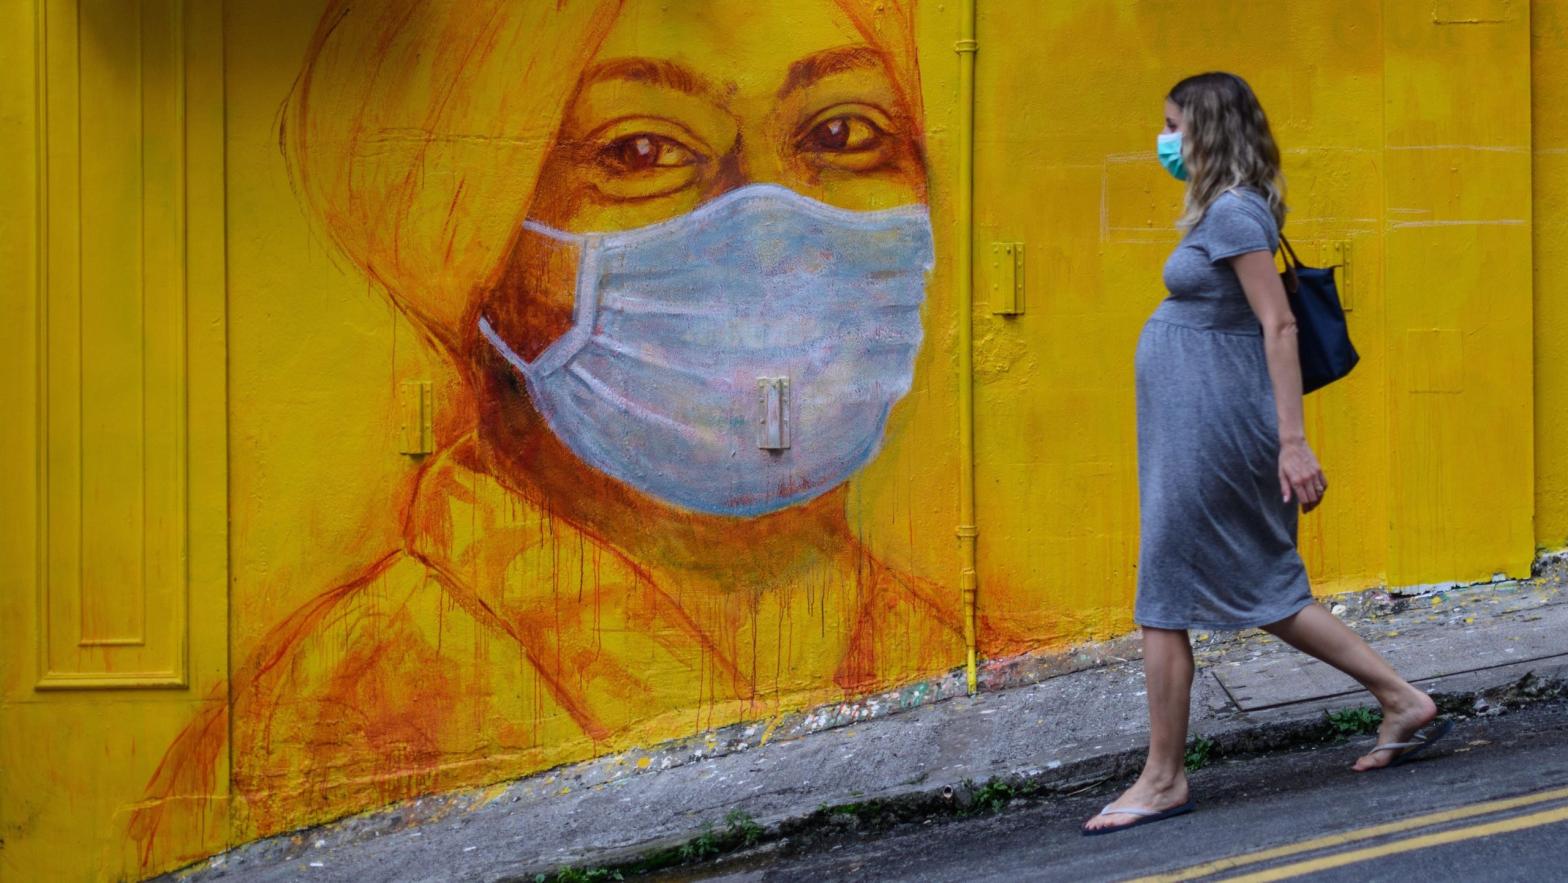 A pregnant woman wearing a face mask walks past a street mural in Hong Kong, on March 23, 2020, (Photo: Anthony Wallace/AFP, Getty Images)